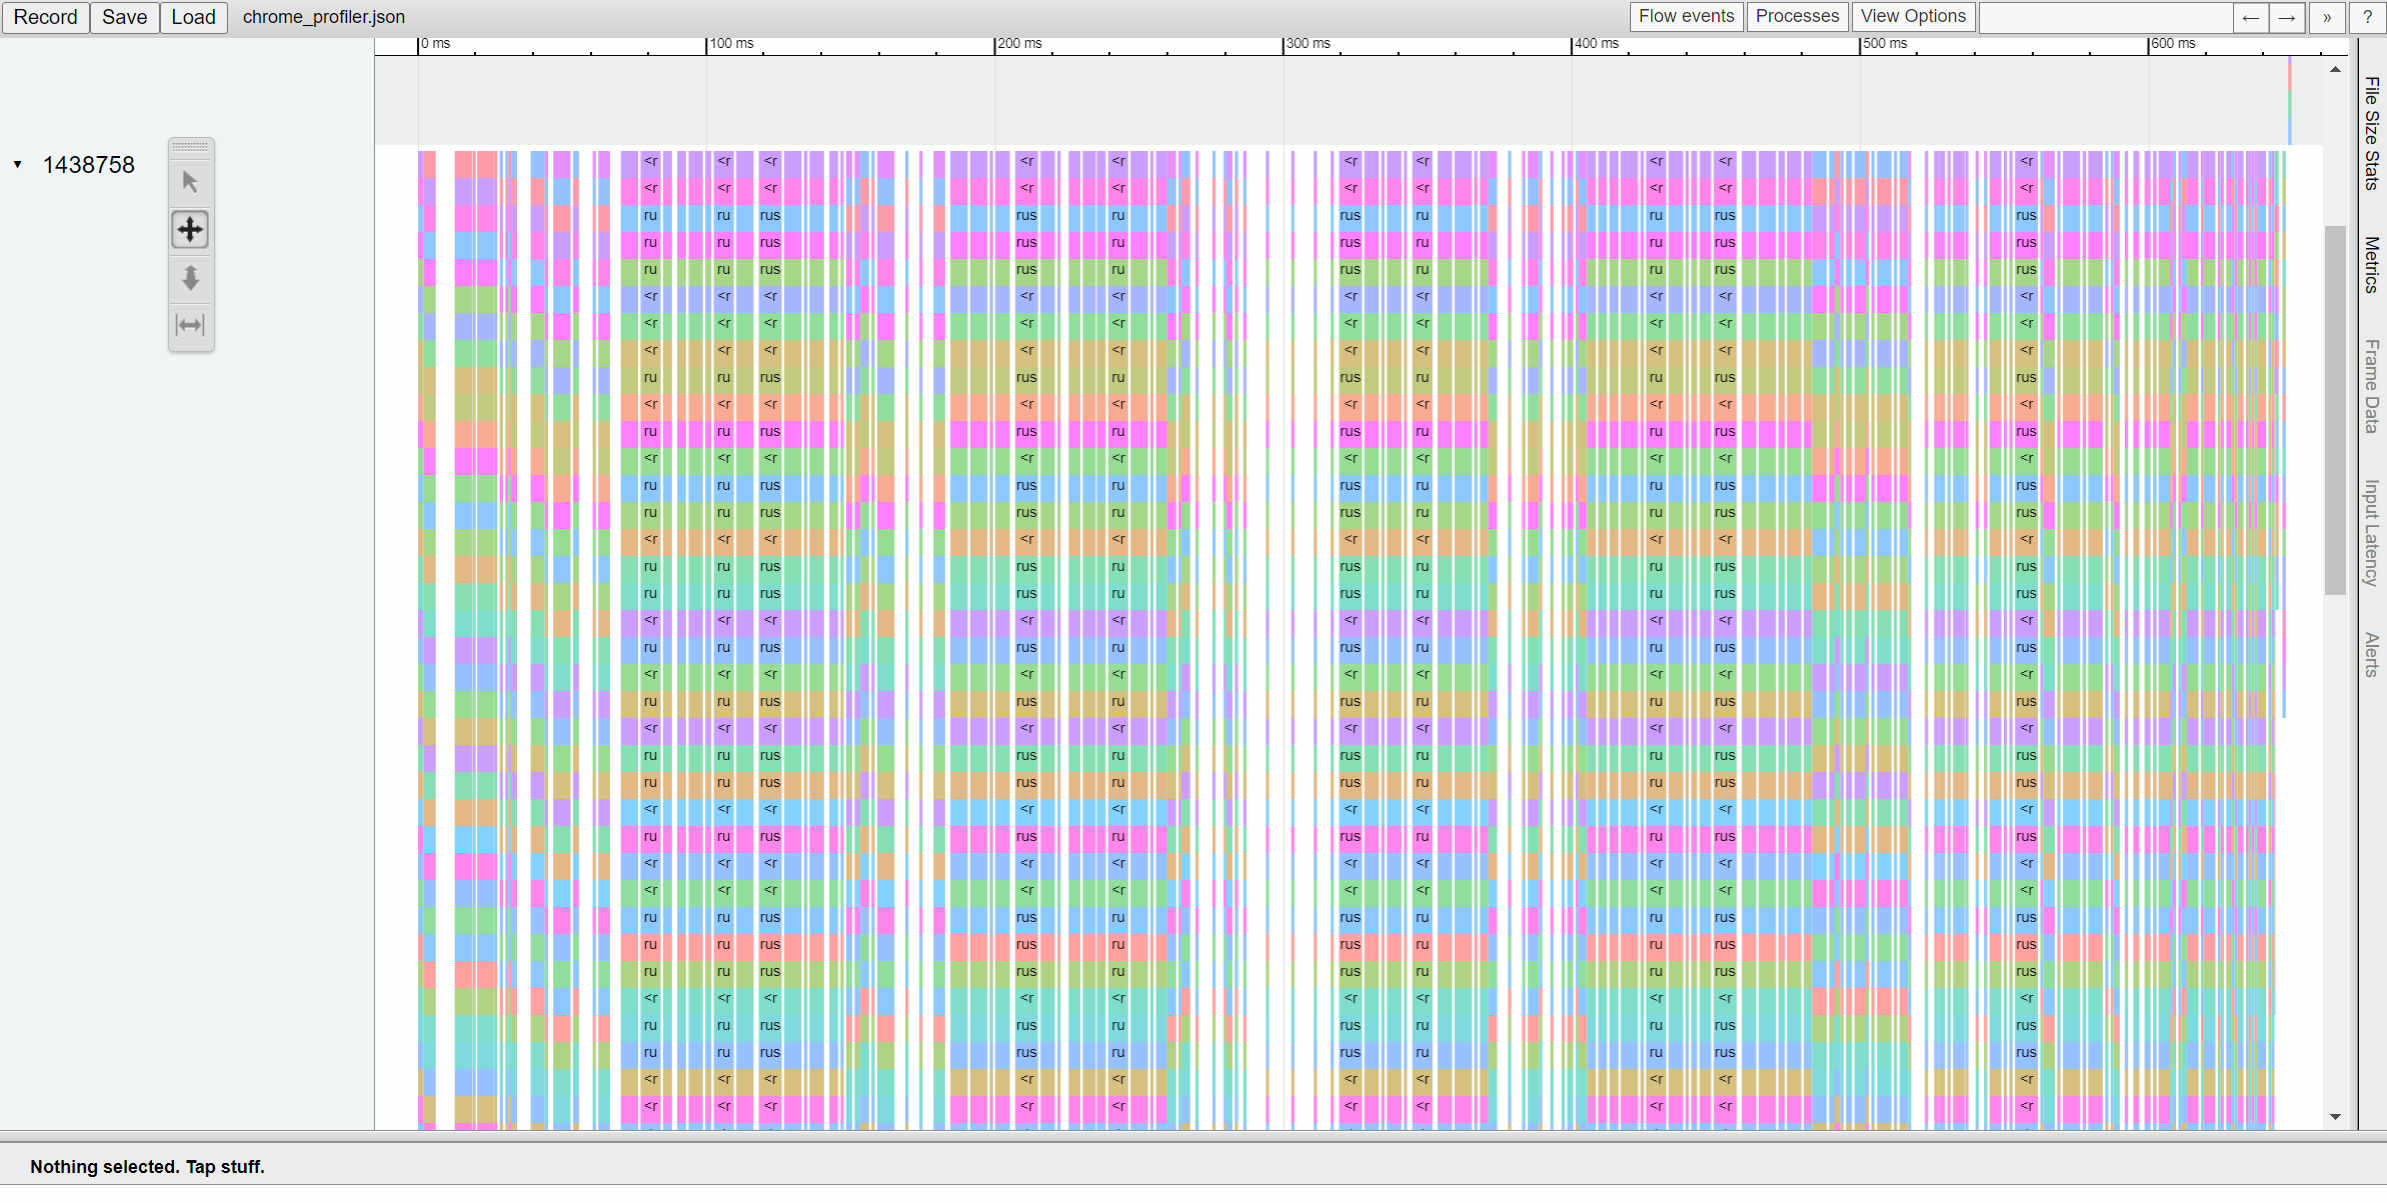 A chrome tracing profile, full of colors but really hard to read unless we zoom in